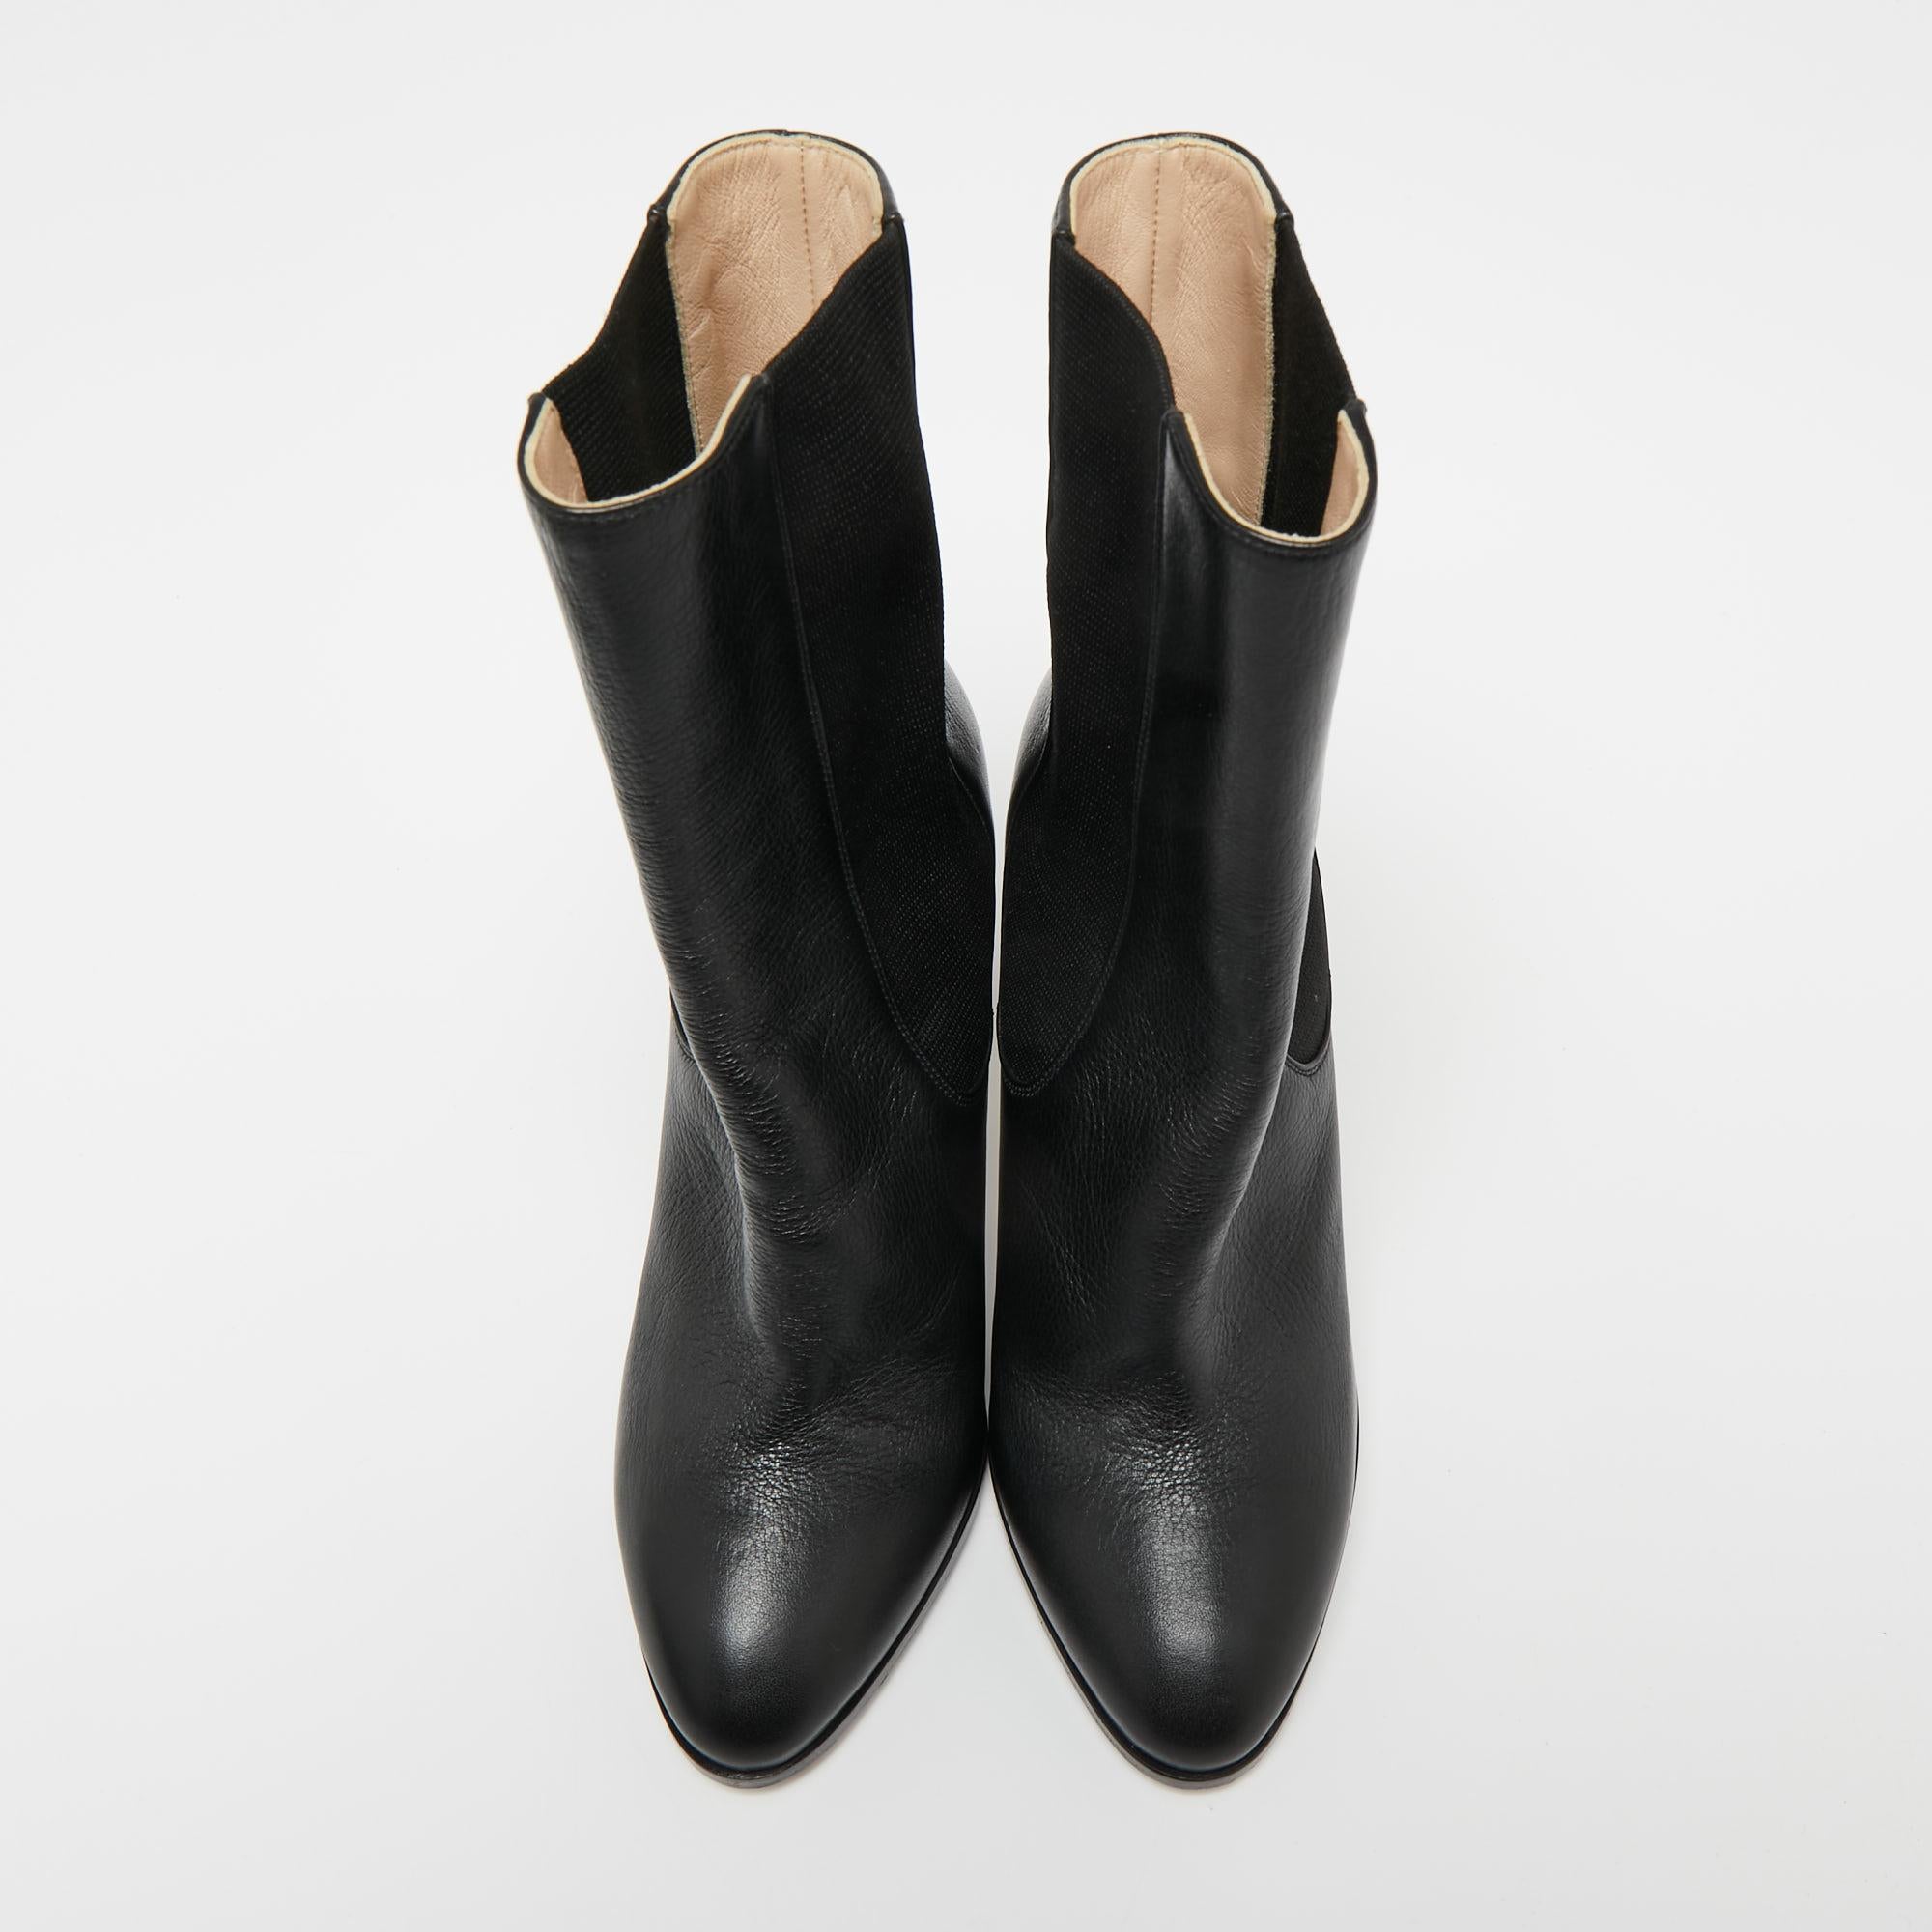 A blend of style and simplicity, these ankle boots from Chanel will sweetly complement your casuals as well as evening ensembles. Crafted with leather, the boots are characterized by the CC logo detailed on the counters' sides. They are styled with